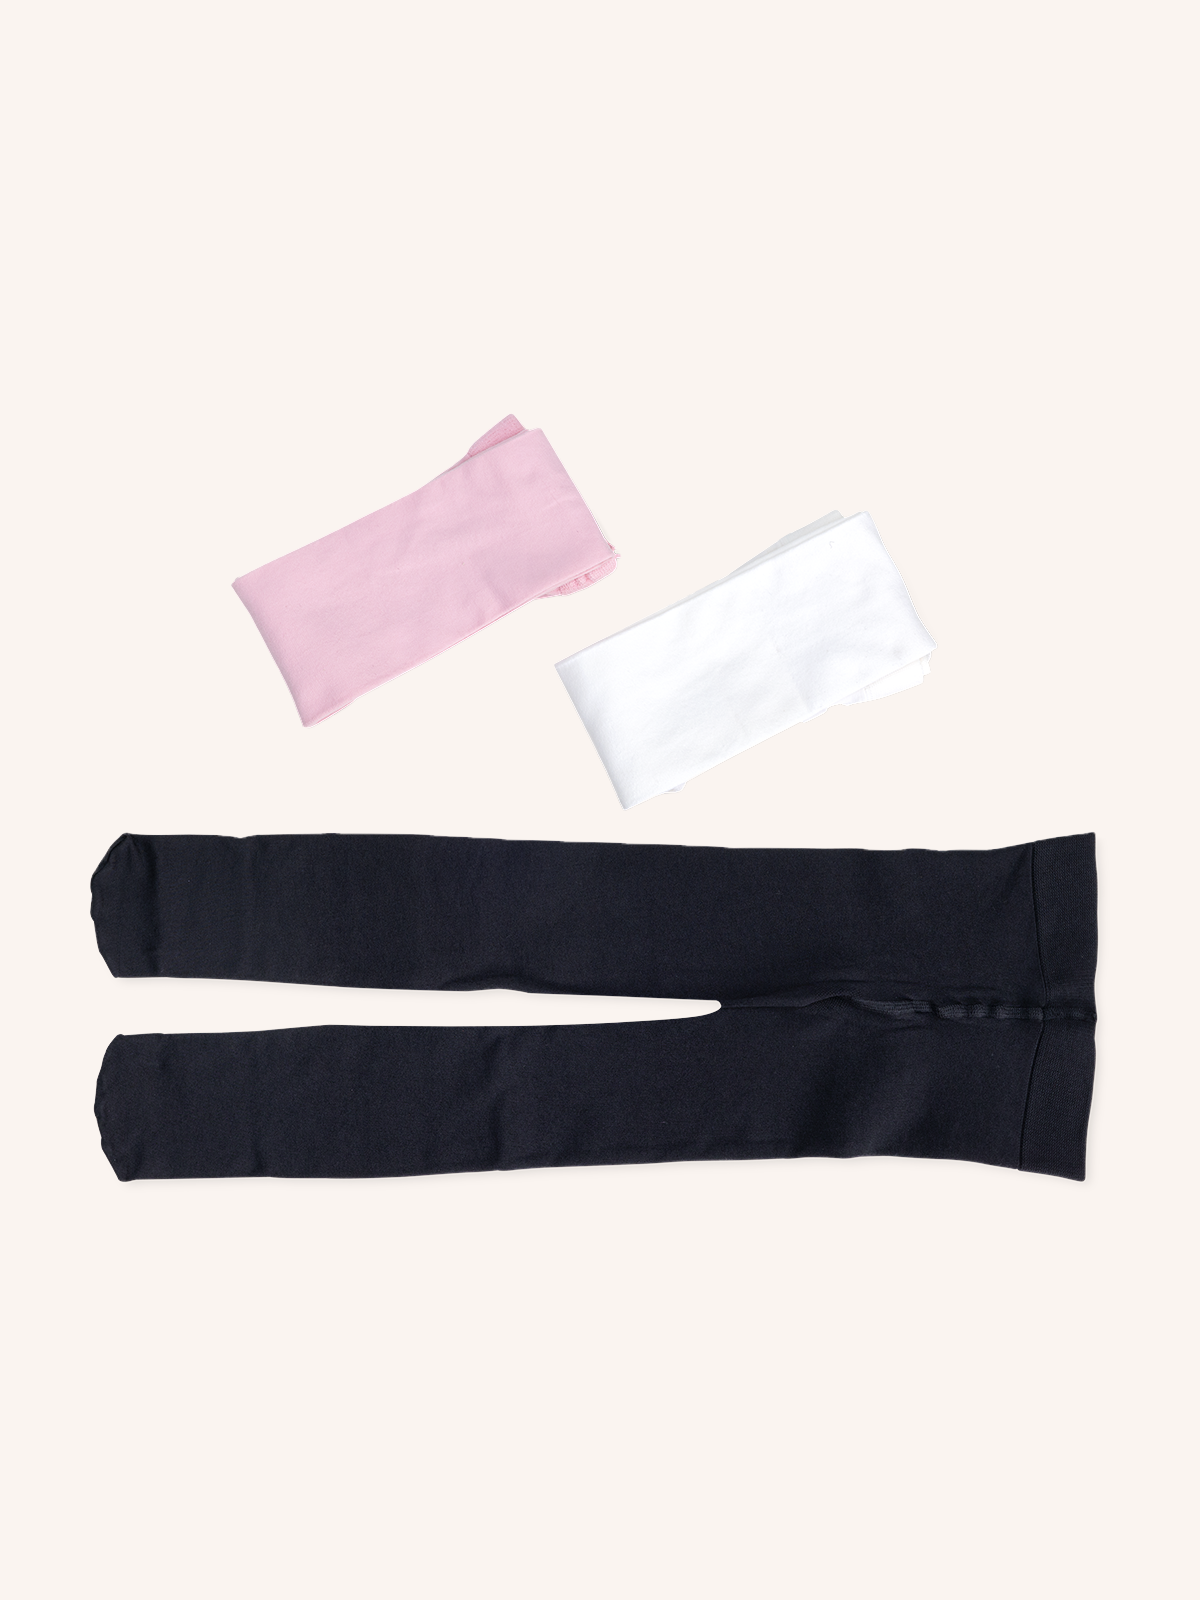 Cotton Tights for Child | Solid Color | Pack of 3 Pairs | Dance Tripack